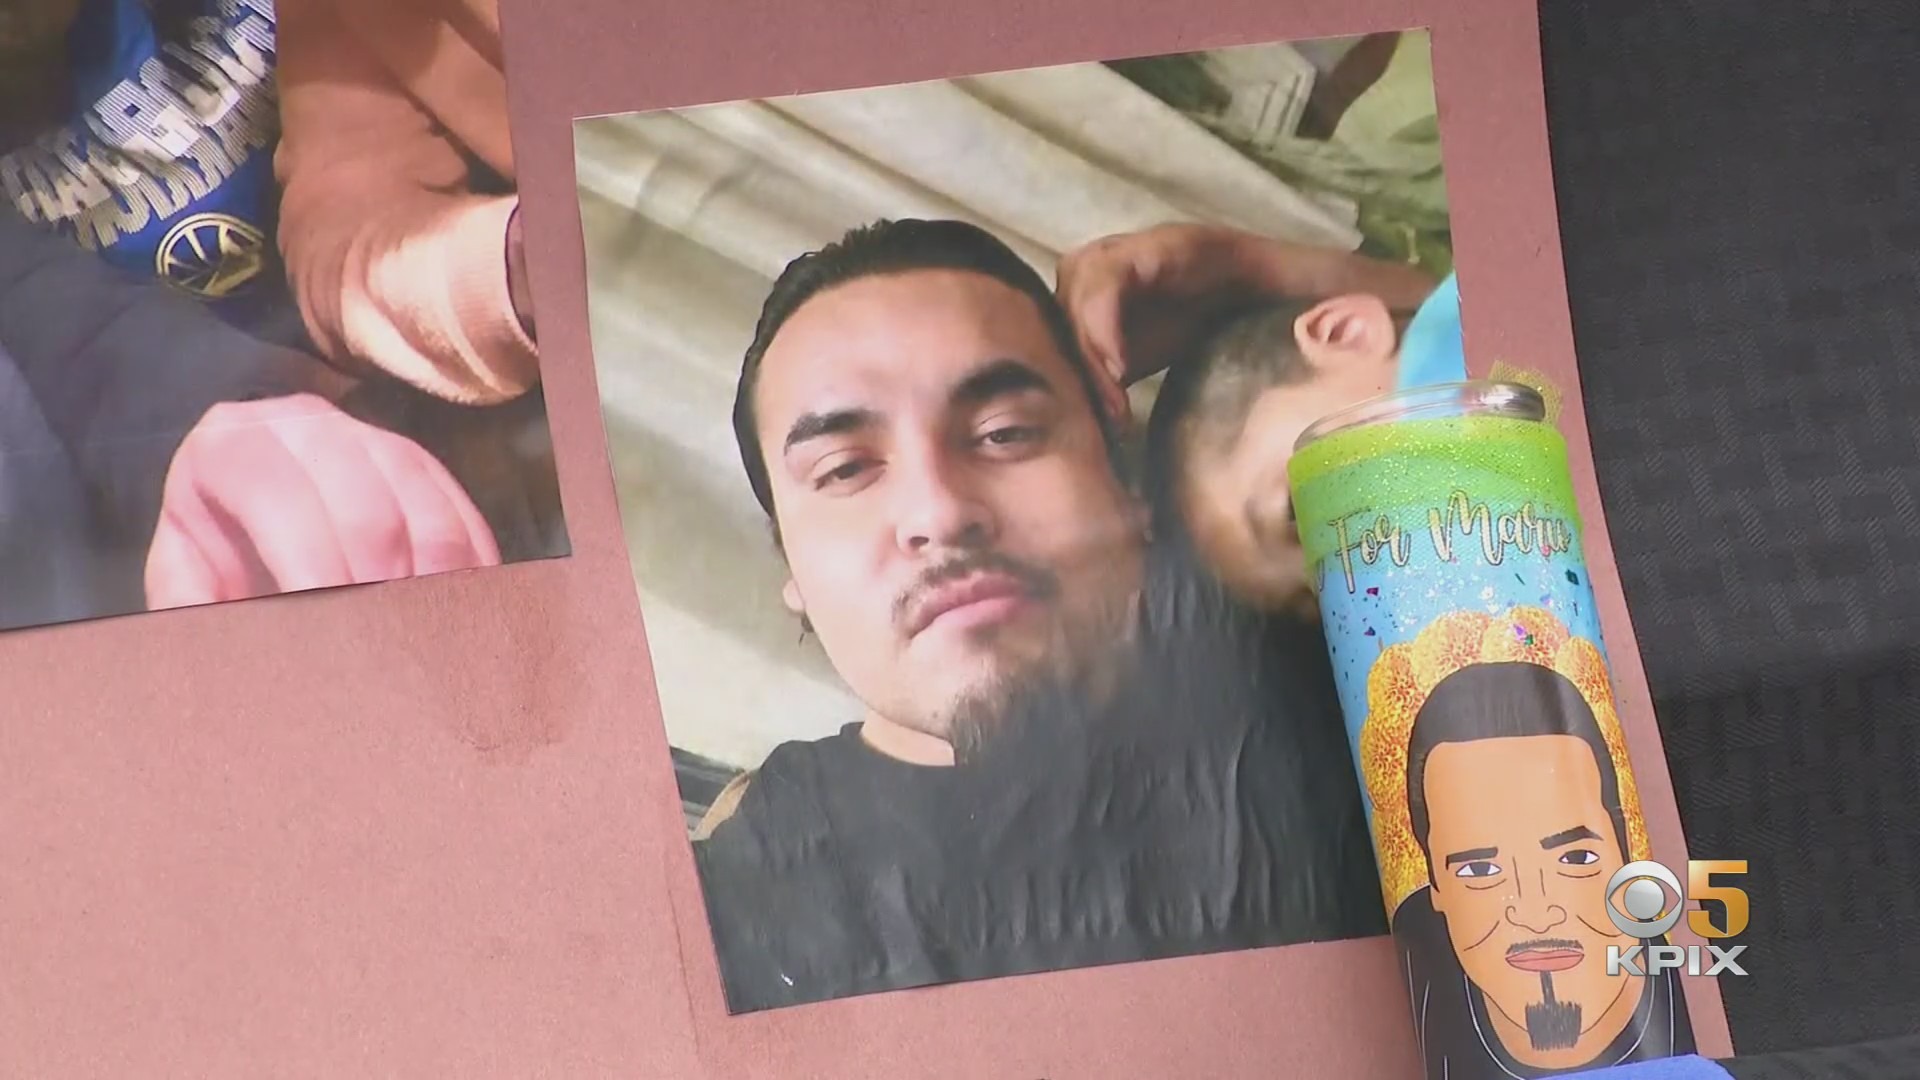 Mario Gonzalez of Oakland, who died in custody of Alameda Police on April 19, 2021. (CBS)